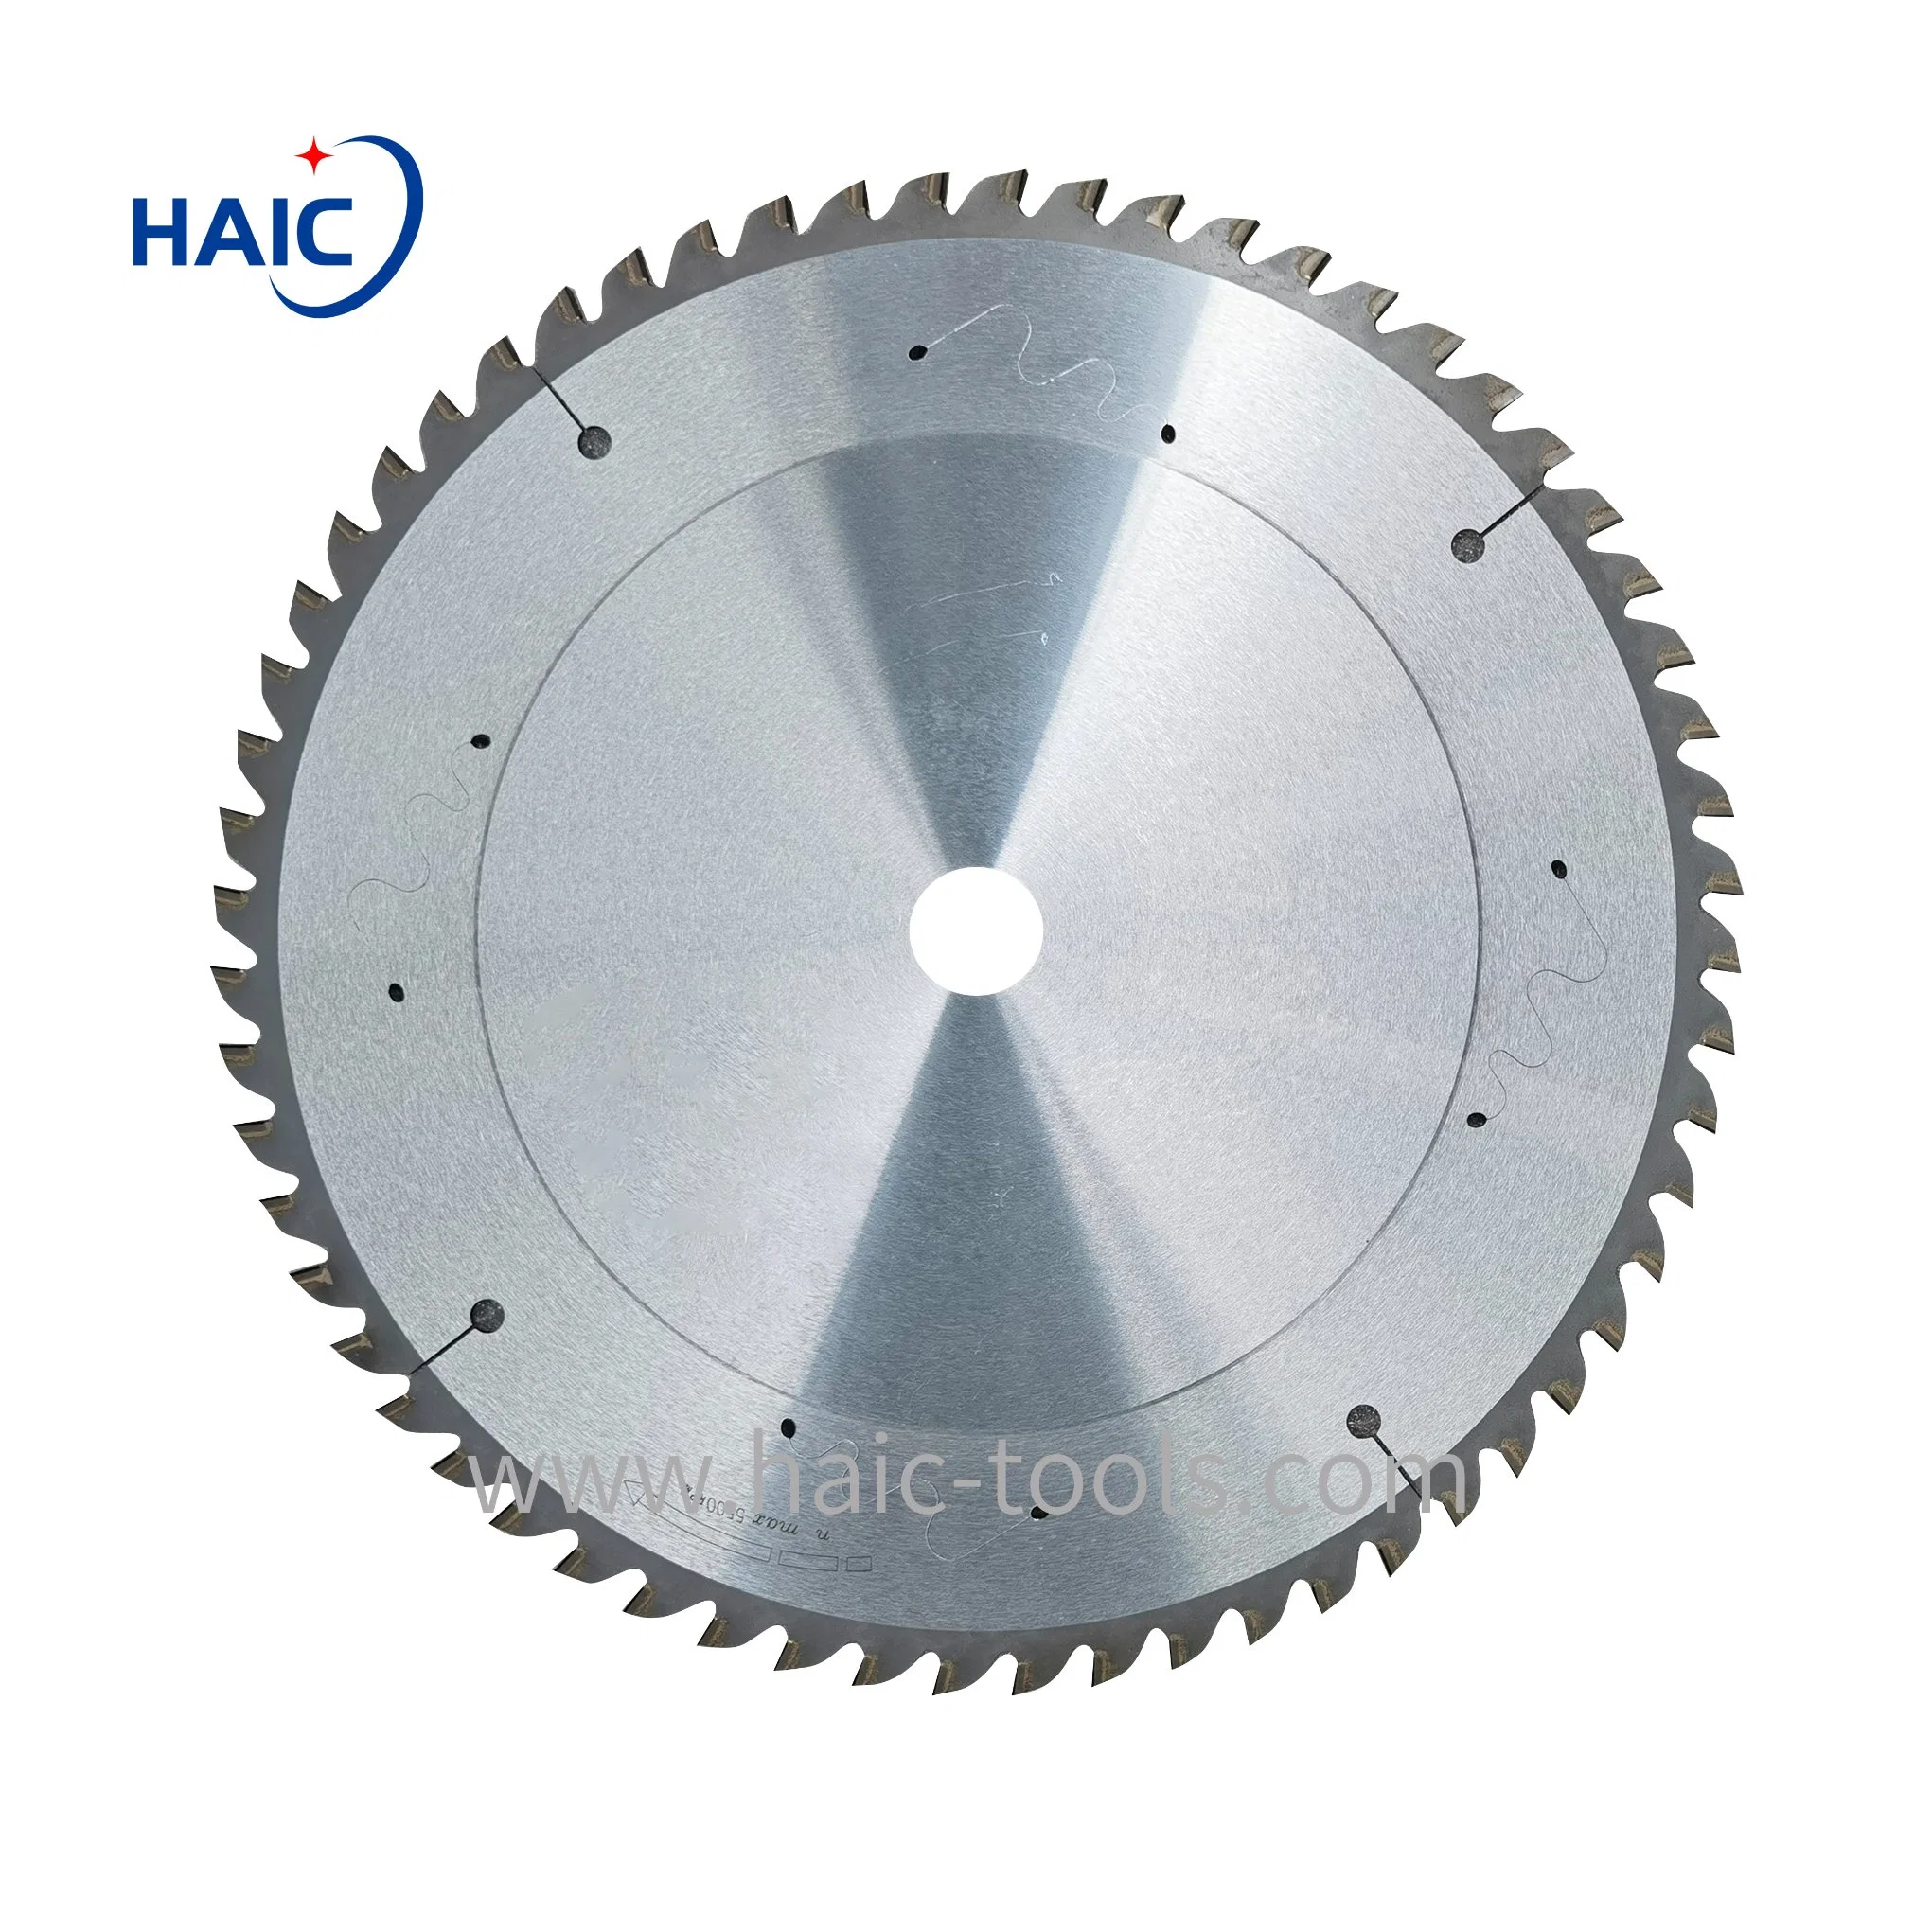 230/250mm PCD Wood Cutting Circular Diamond Saw Blade for Aluminium, Chipboard, MDF, Non-Ferrous Metals, Ceramics and Other Materials.